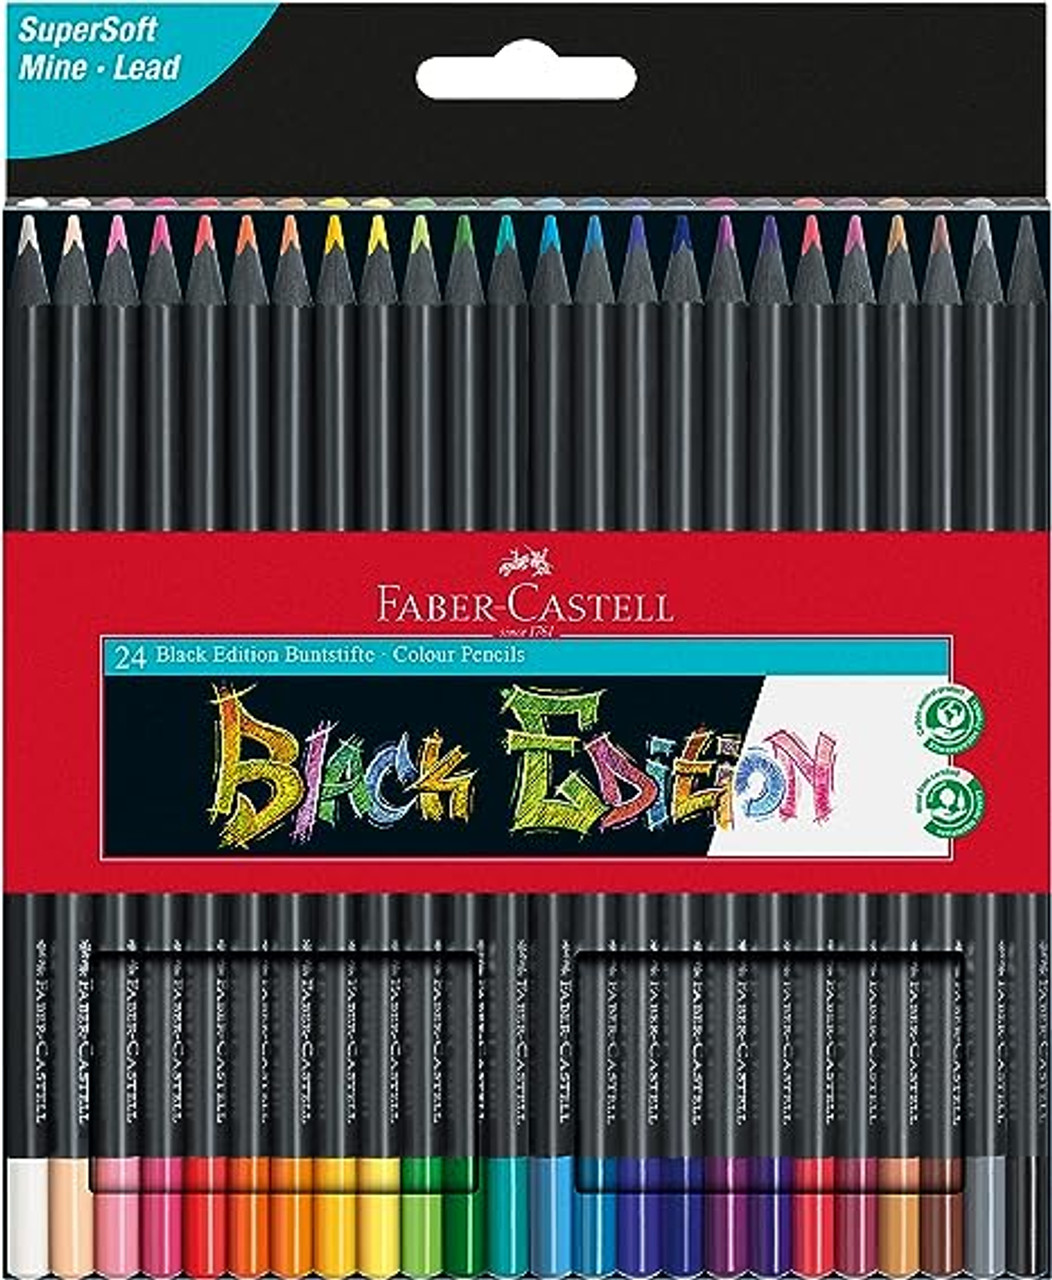 Faber-Castell Black Edition Colored Pencils - 12 Count, Black Wood and  Super Soft Core Lead, Professional Quality Colored Pencils for Adult  Coloring